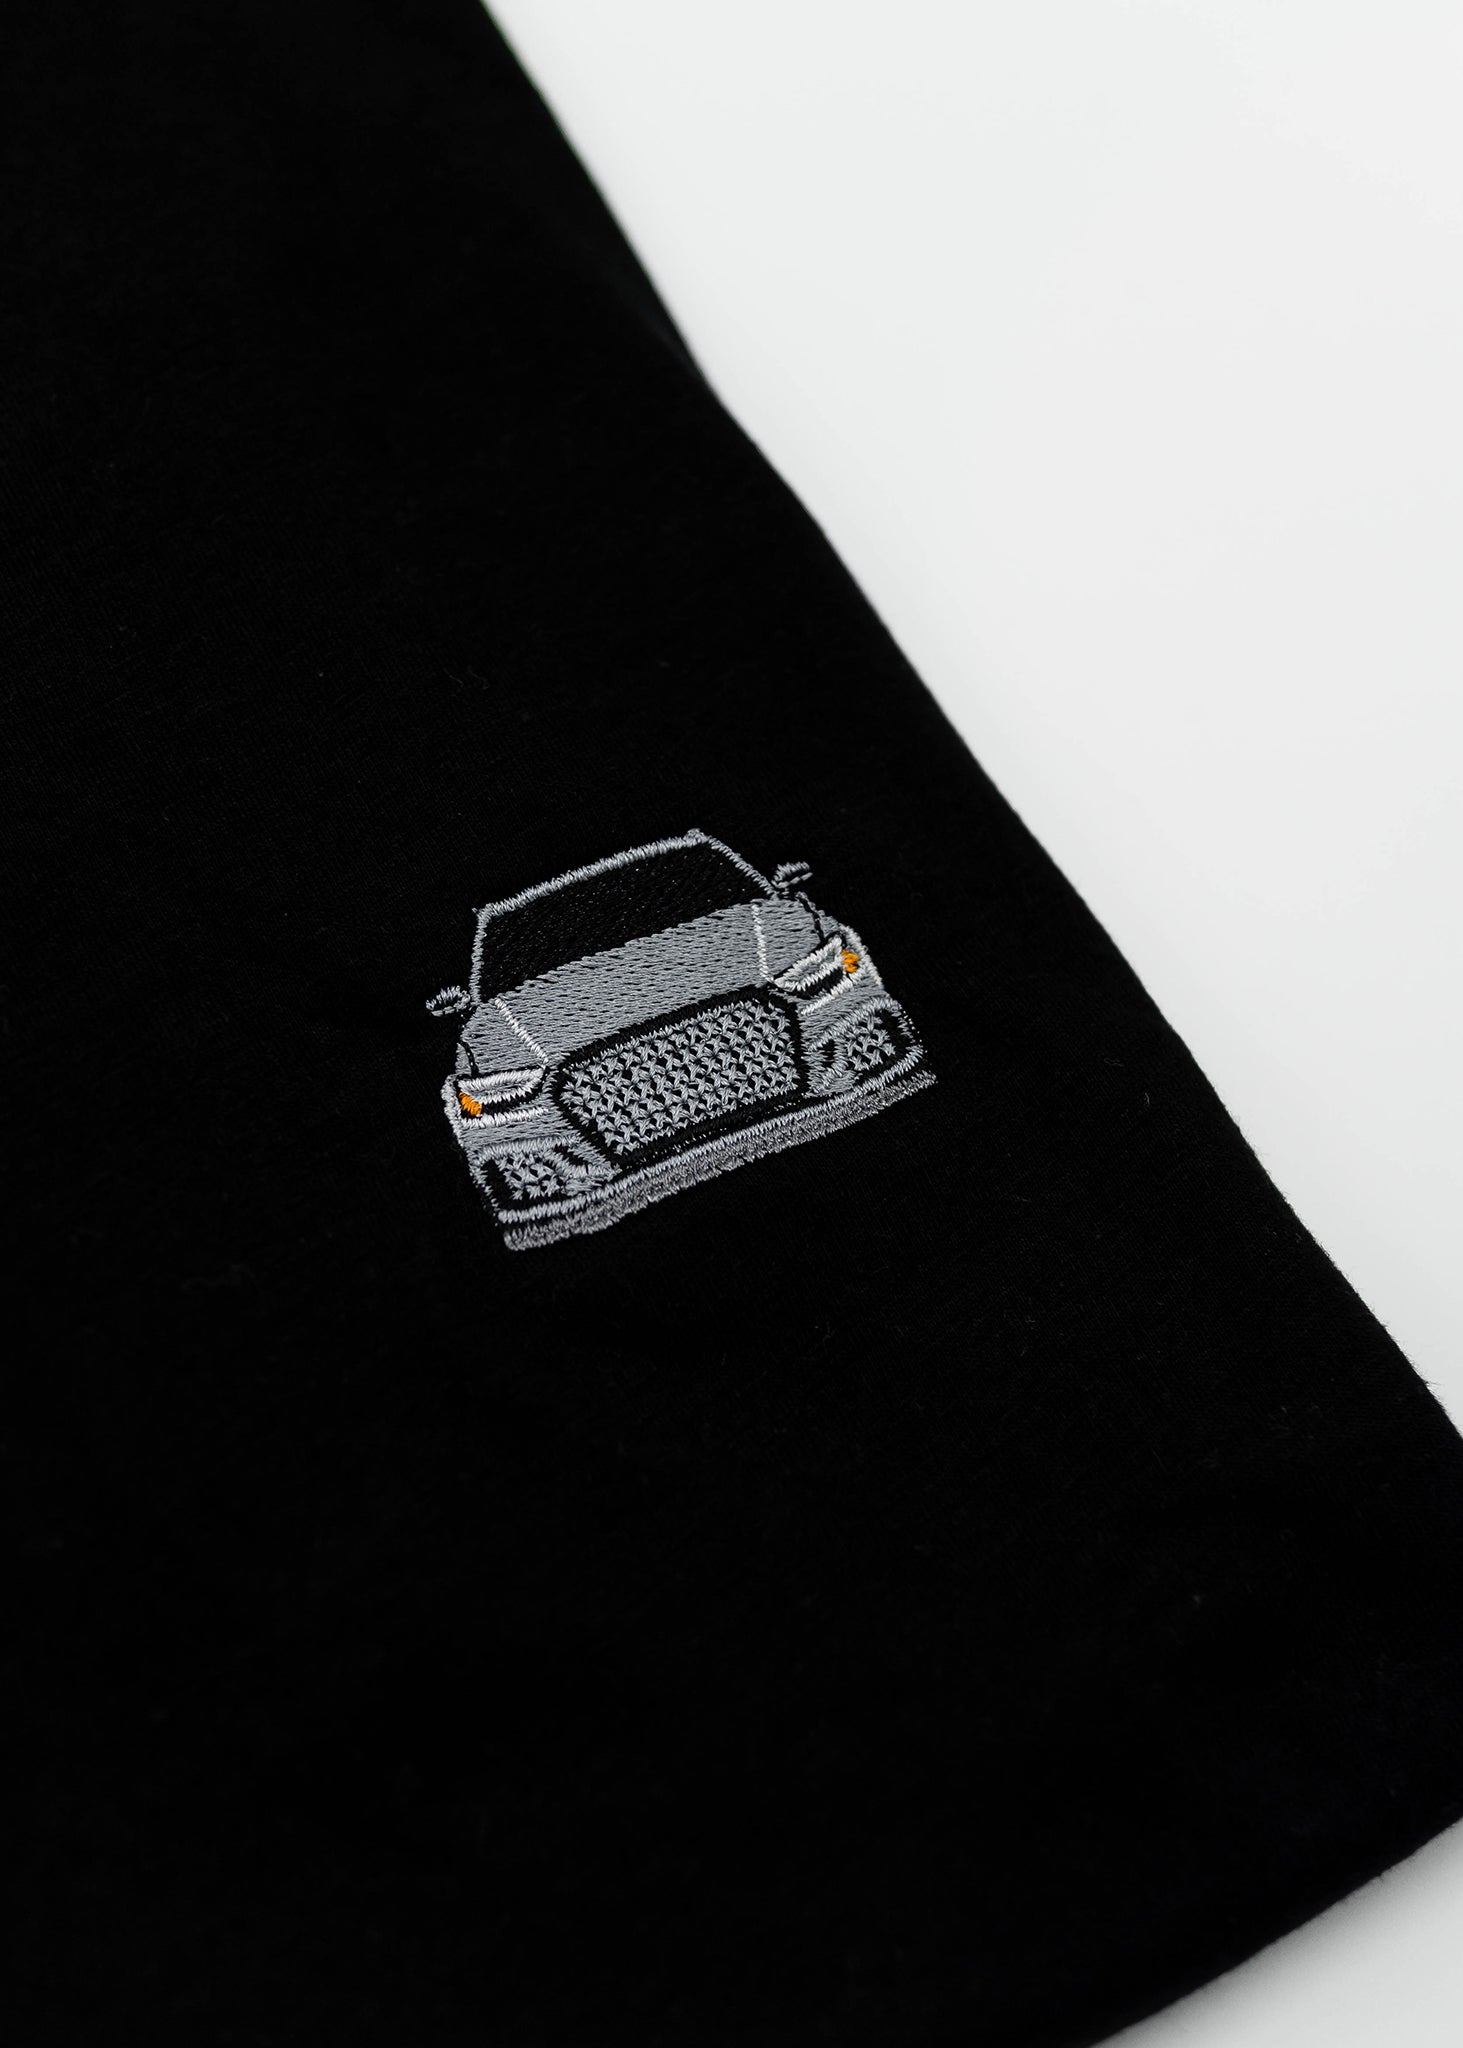 Close up of an embroidered 8V RS3 on a black men's cotton t-shirt. Photo shows the high quality detailed embroidery of a nardo grey 8V RS3. Fabric composition of the shirt is polyester and cotton. The material is very soft, stretchy, and non-transparent. The style of this t-shirt is short sleeve, round bottom, crewneck, with embroidery on the left chest.